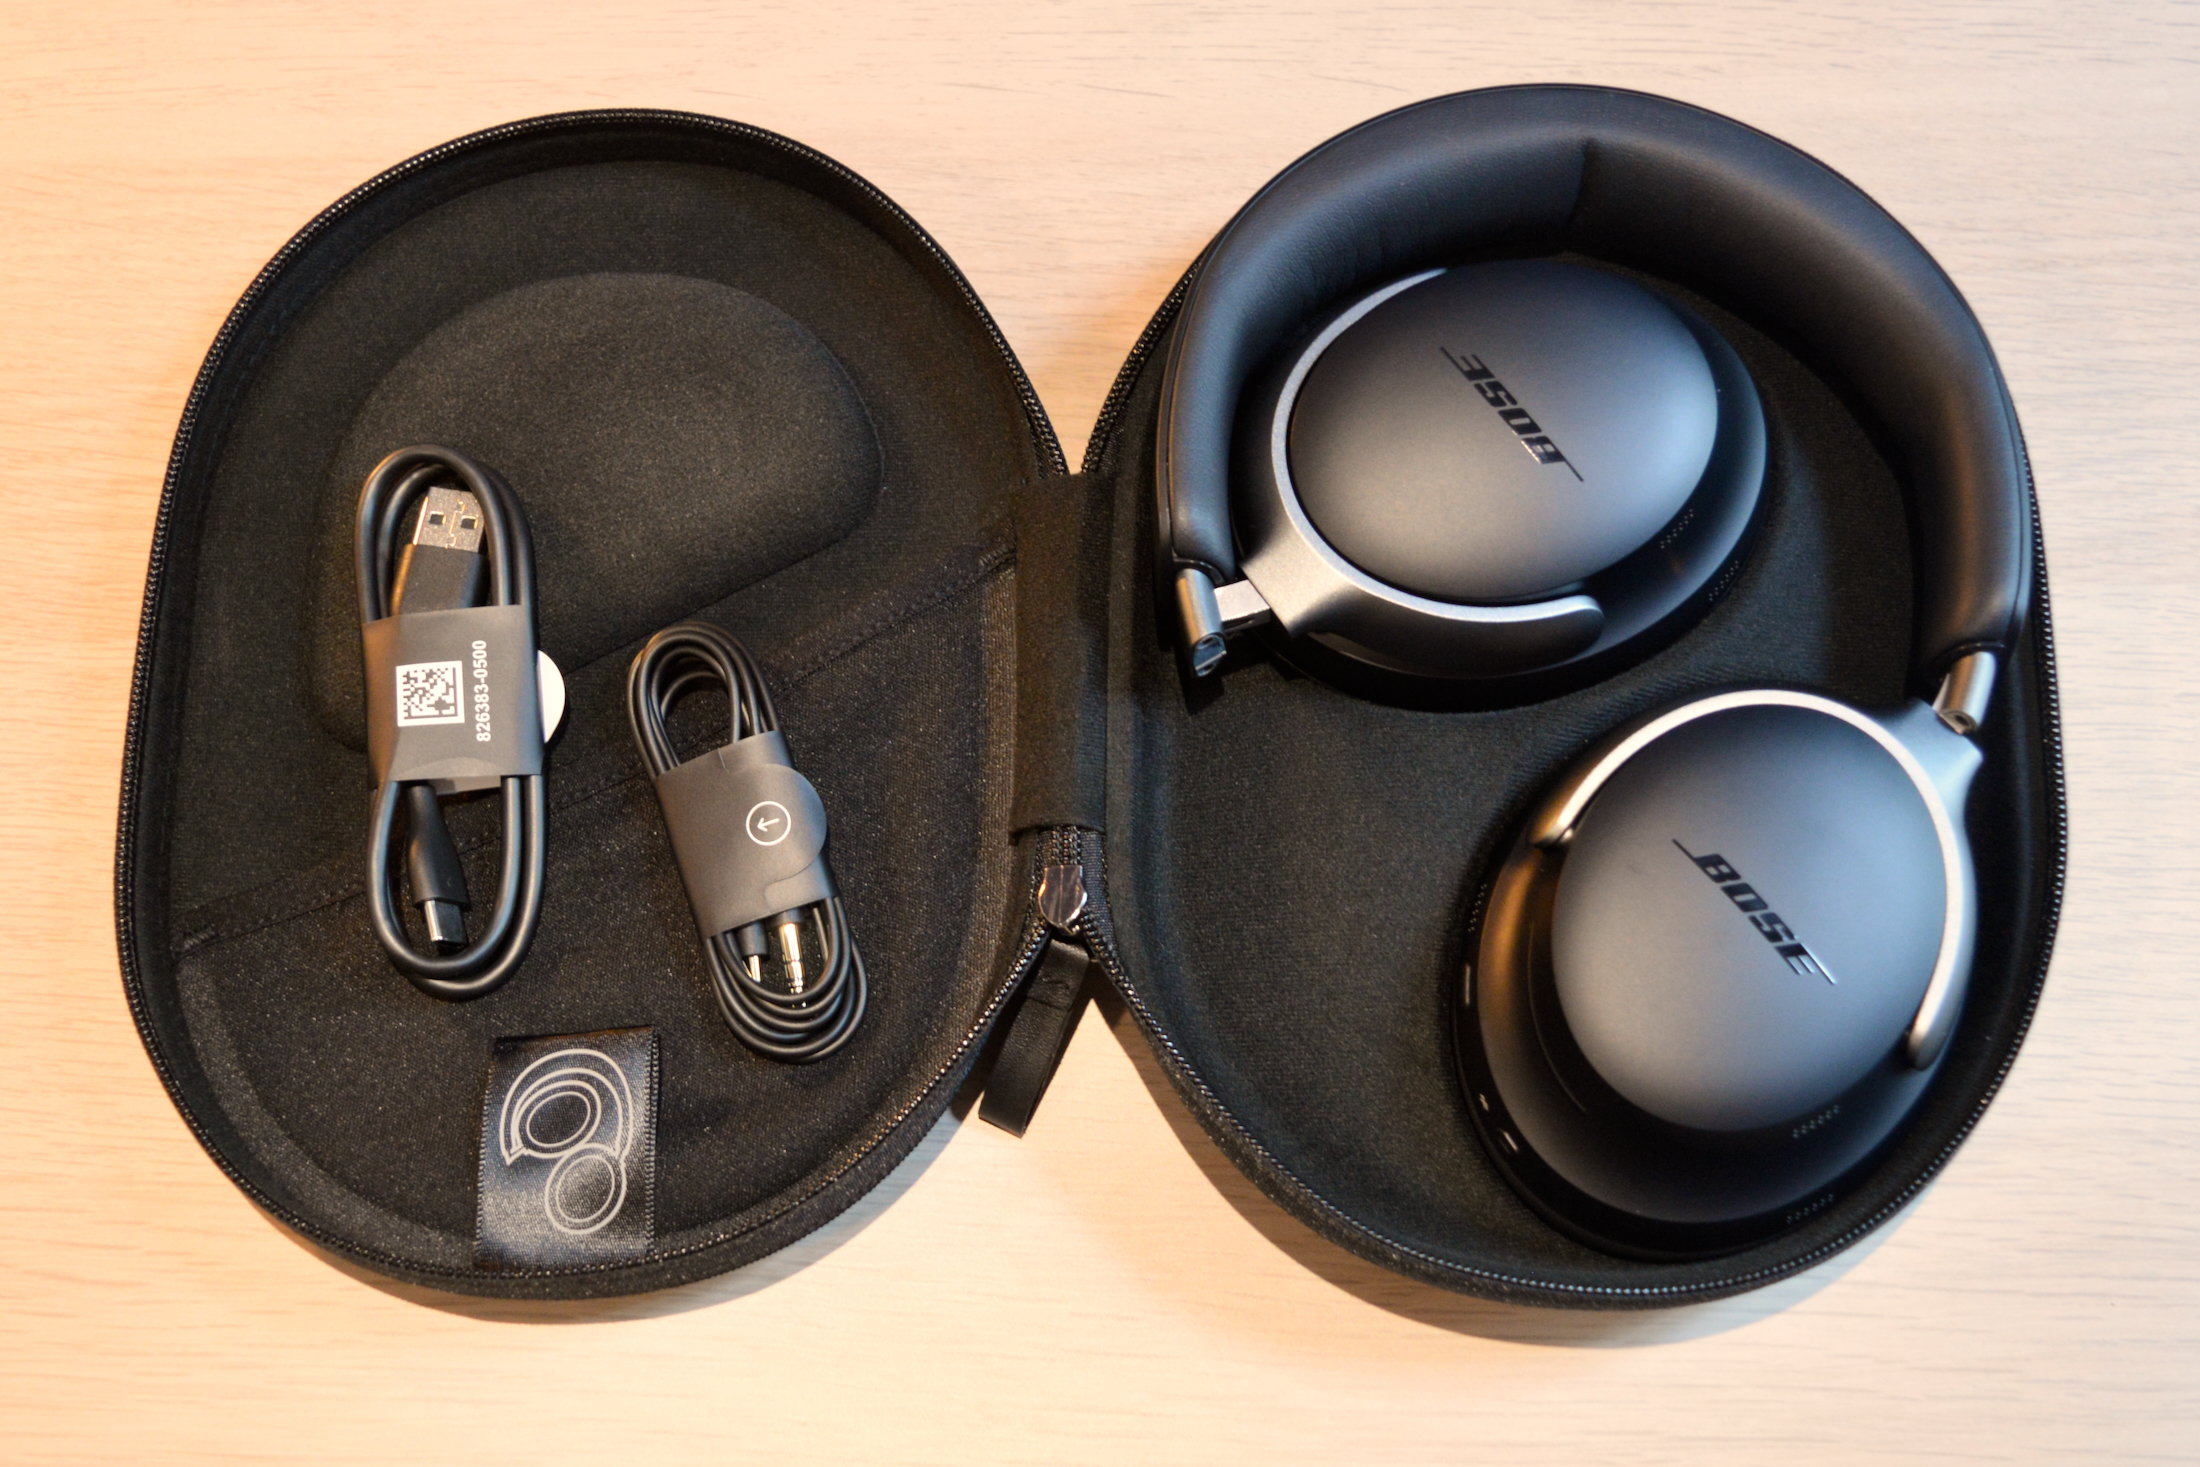 Bose's QuietComfort Ultra Headphones have plunged to a new all